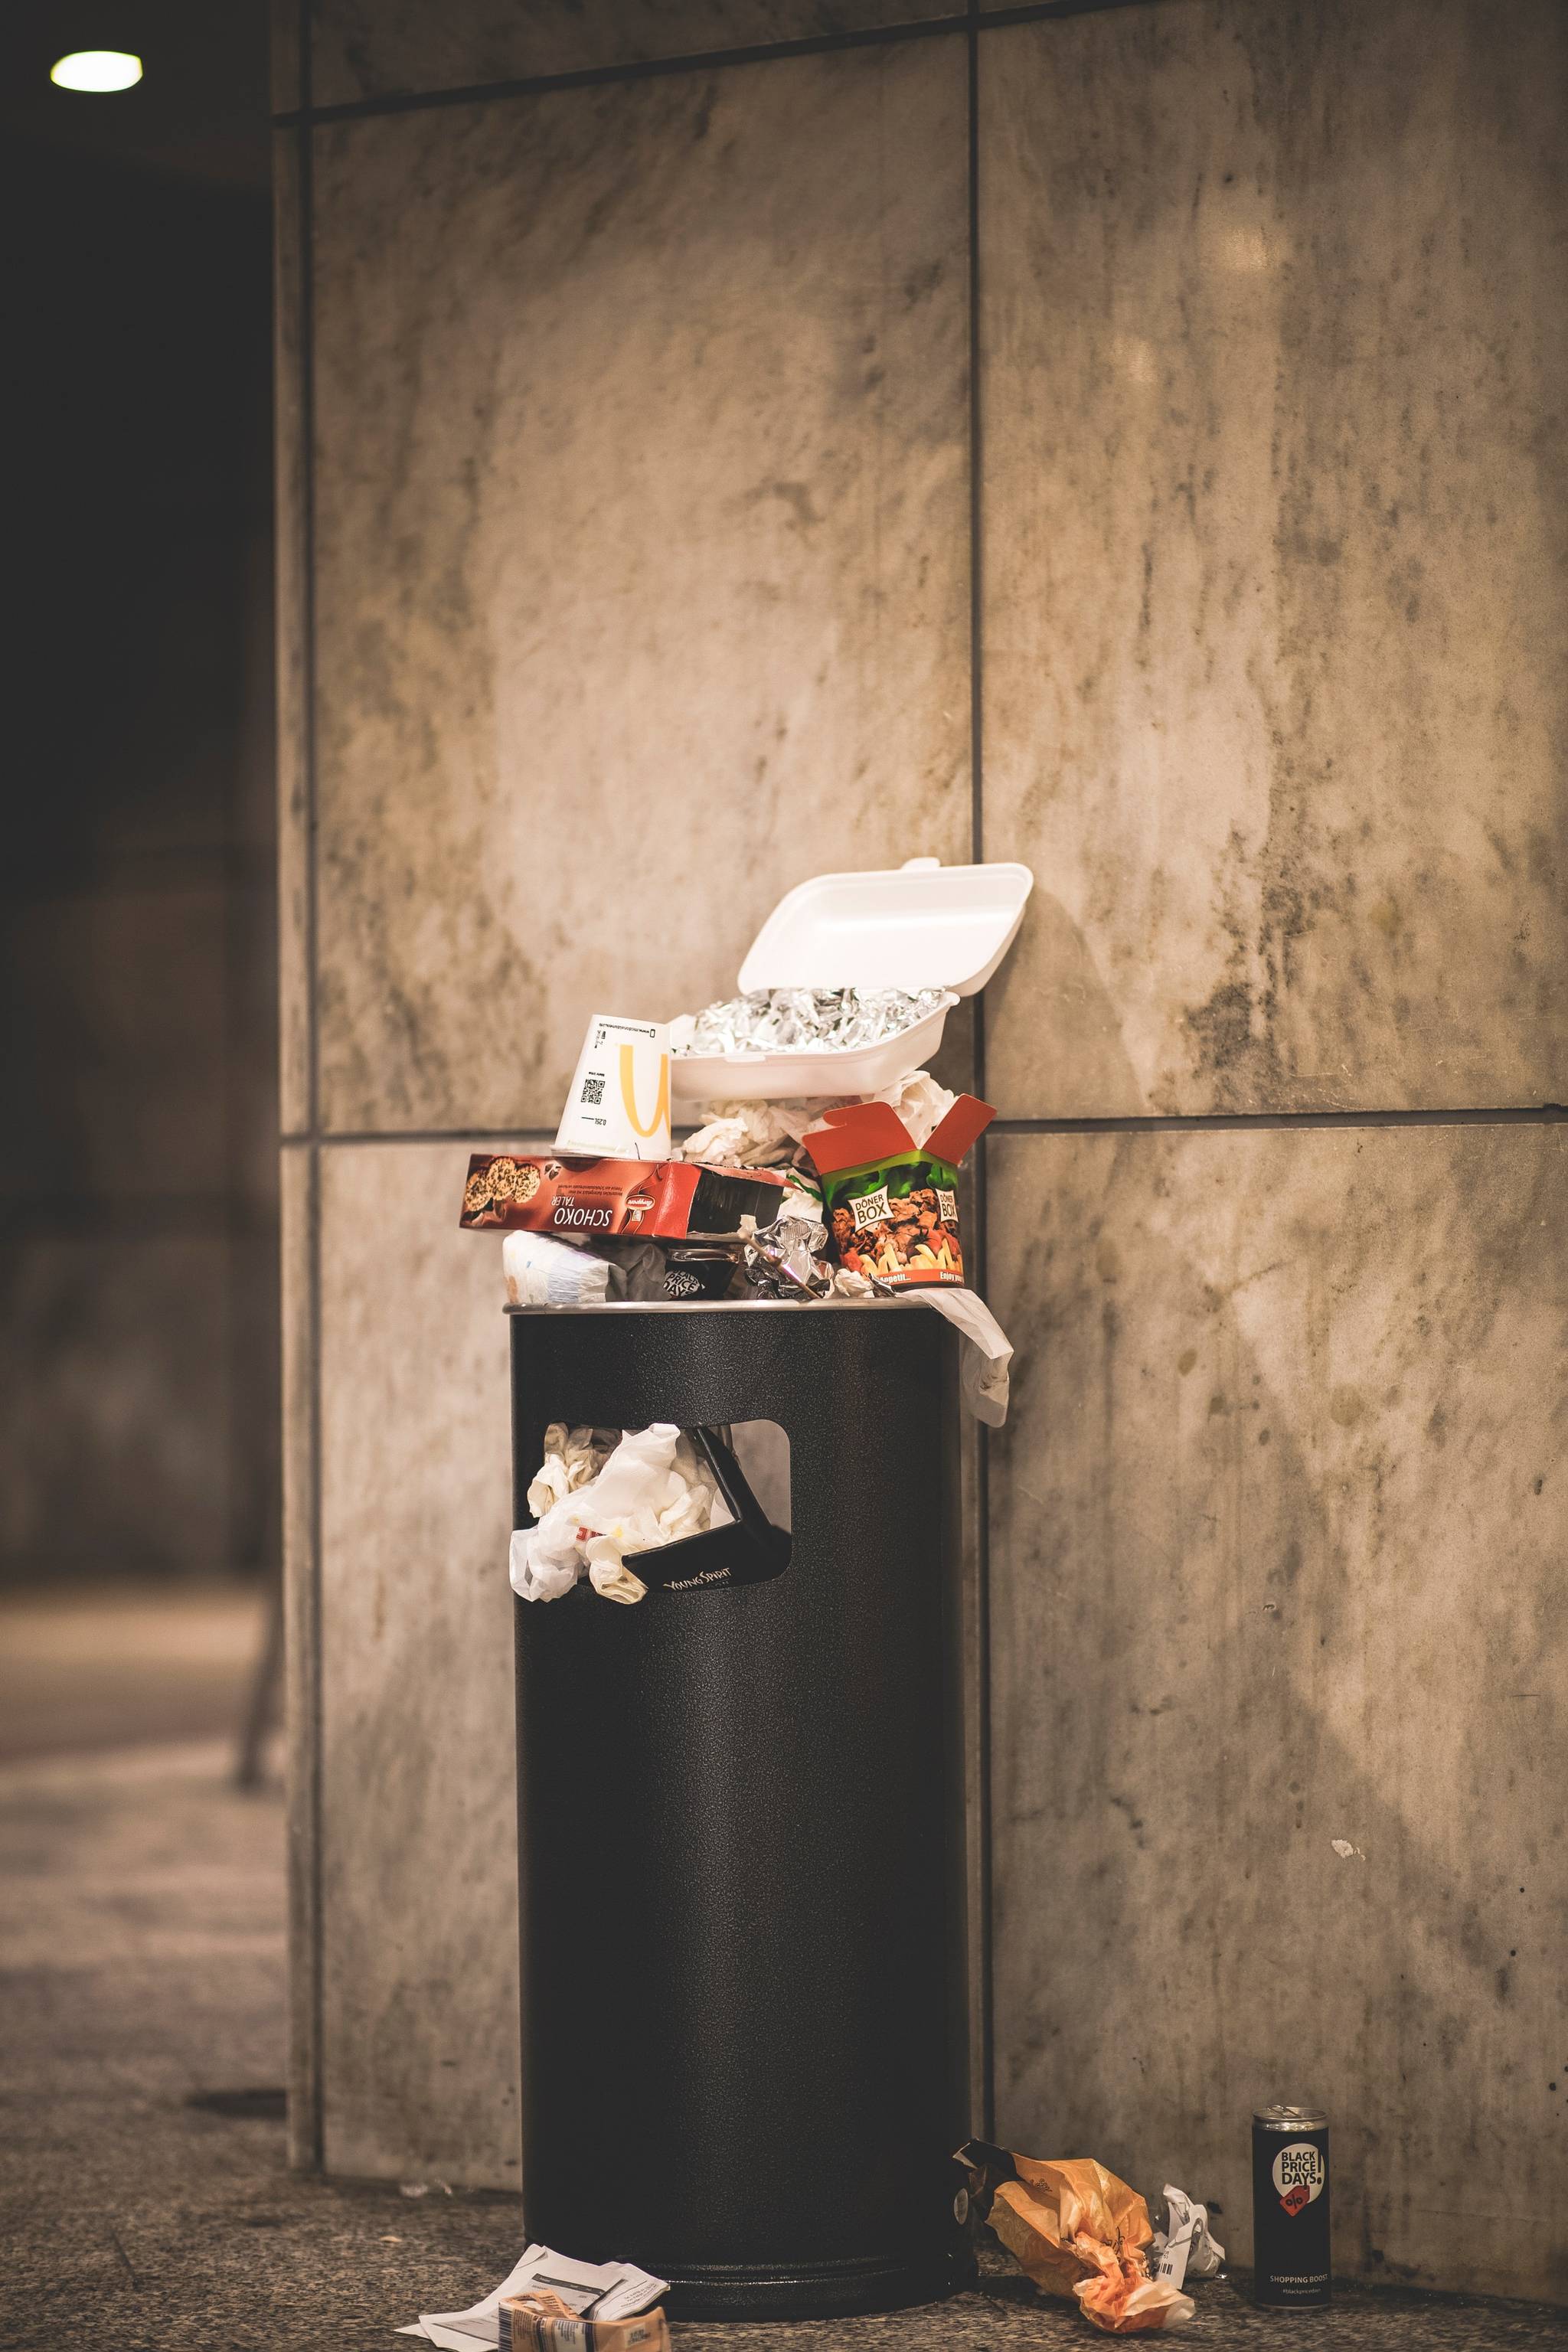 Recelery helps neighbors fight food waste and inflation